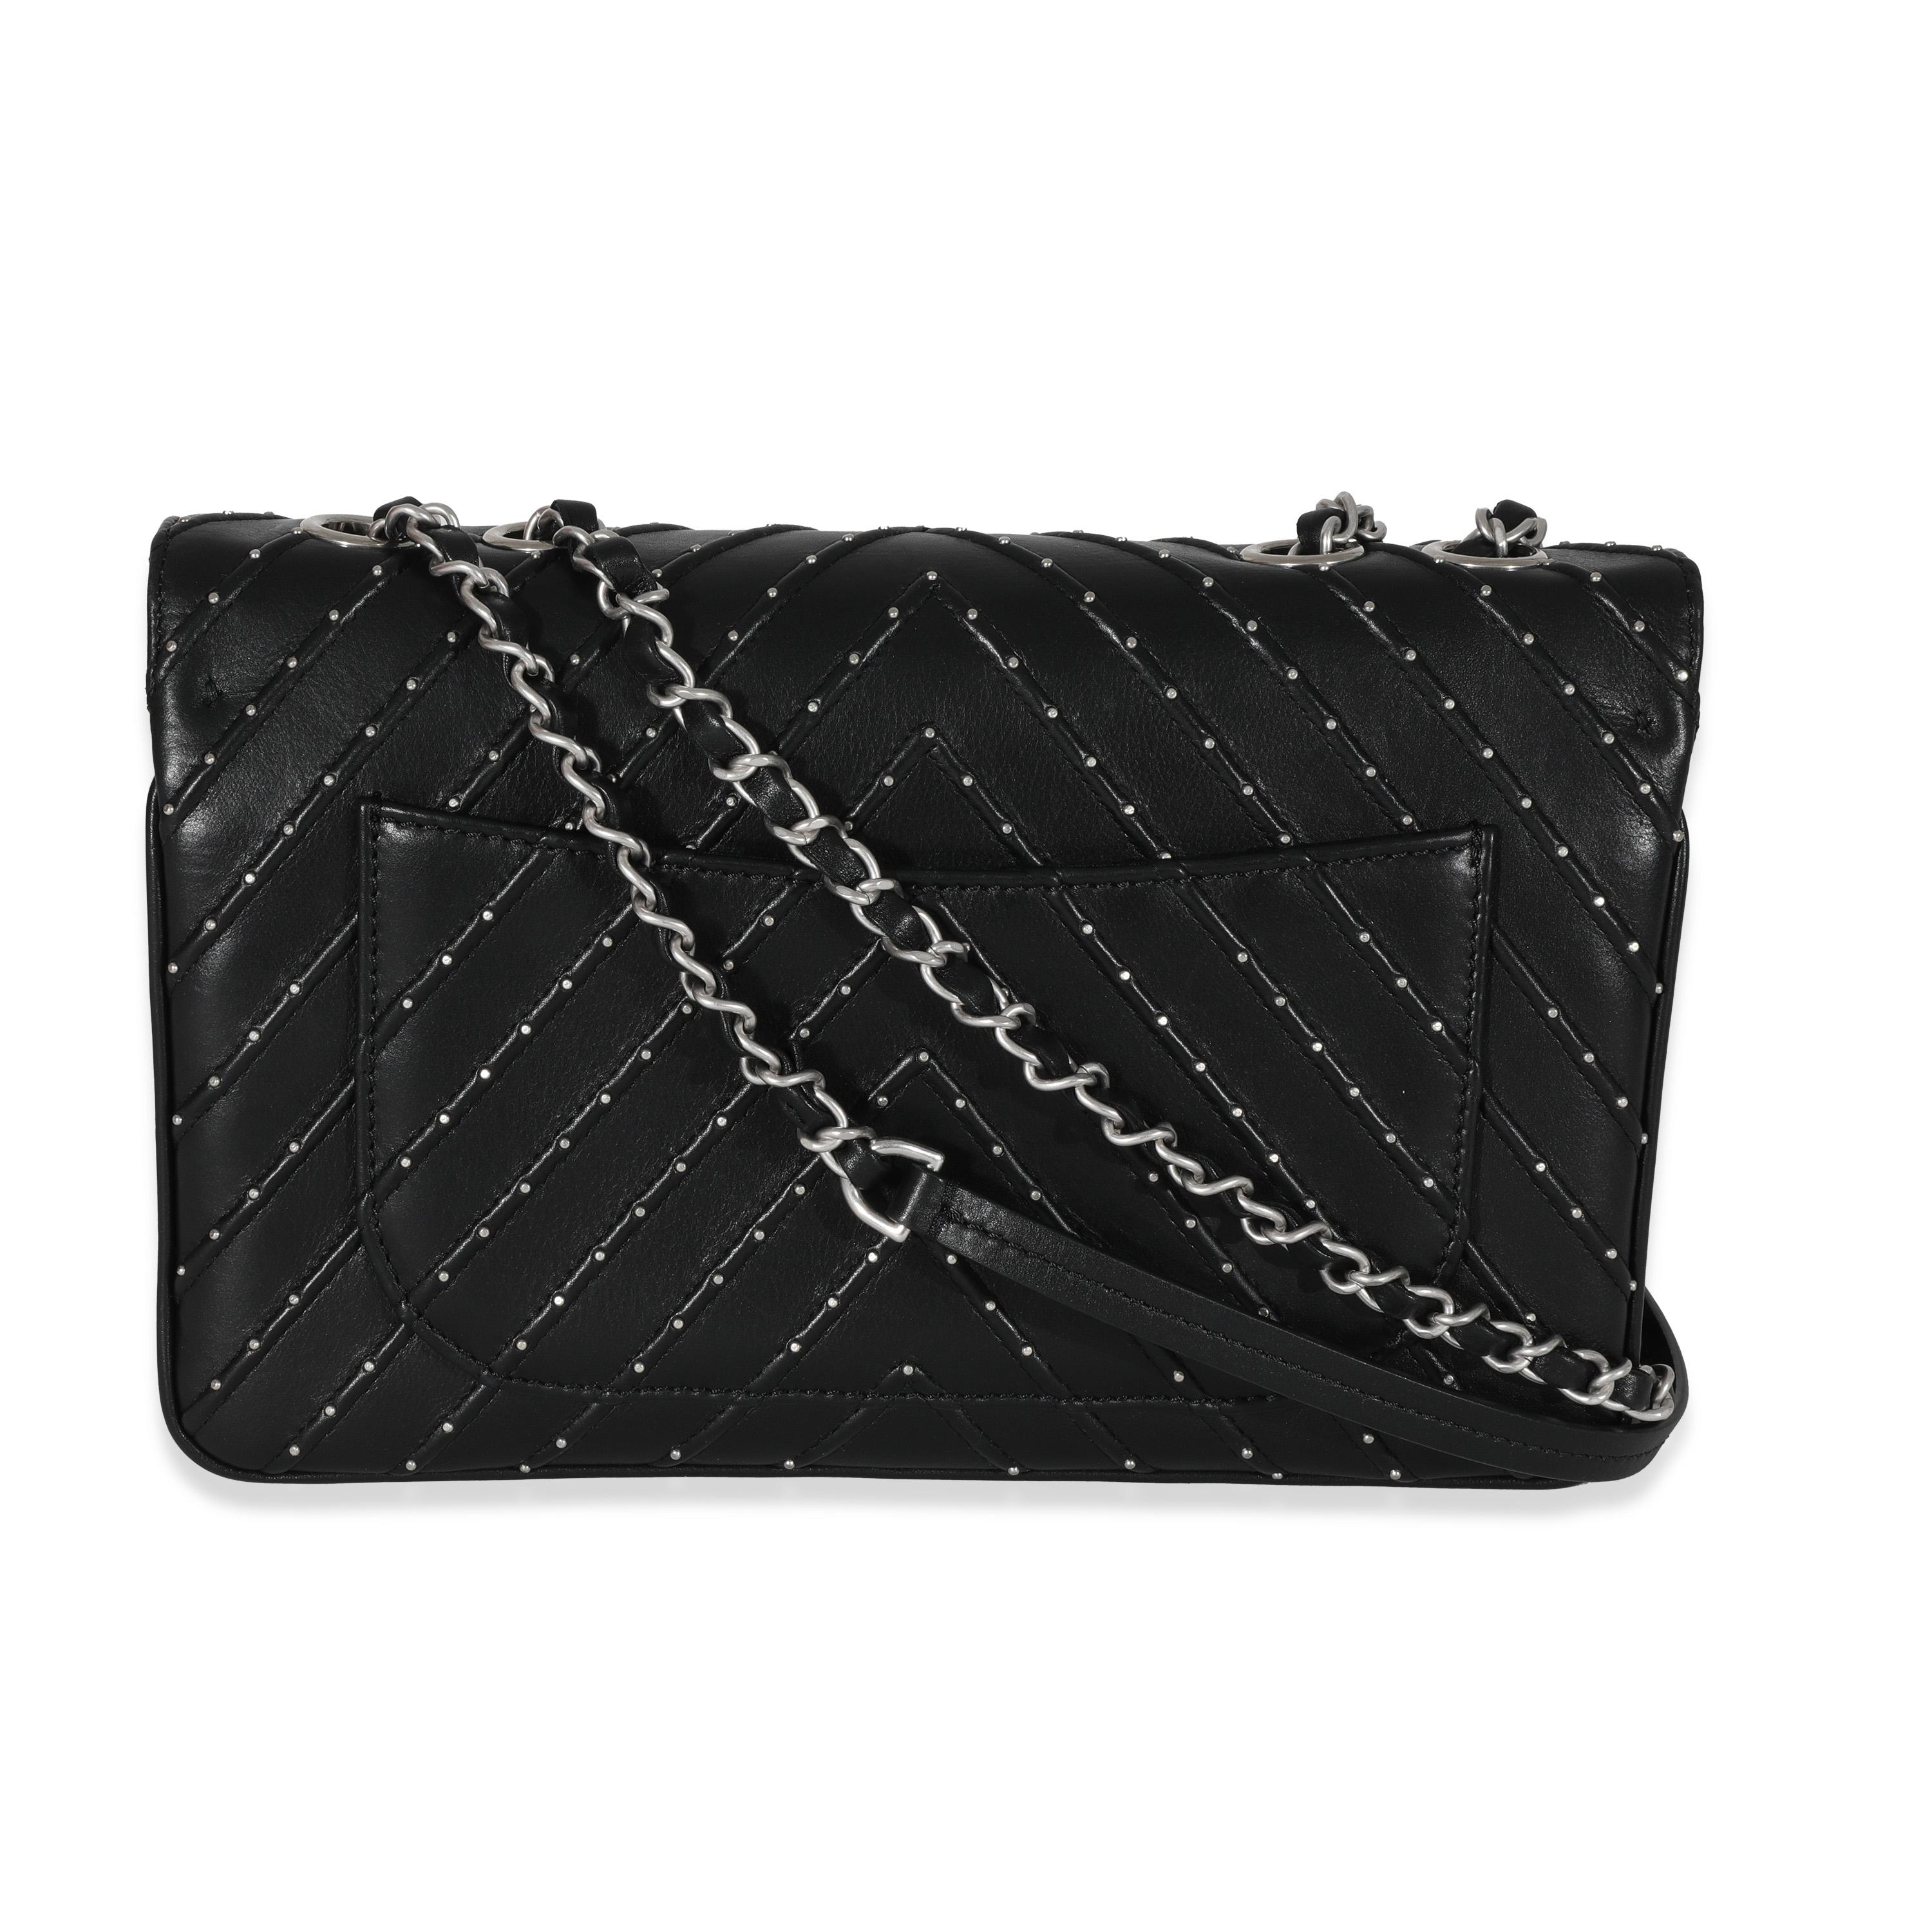 Chanel Black Calfskin Chevron Small Stud Wars Flap Bag In Excellent Condition In New York, NY